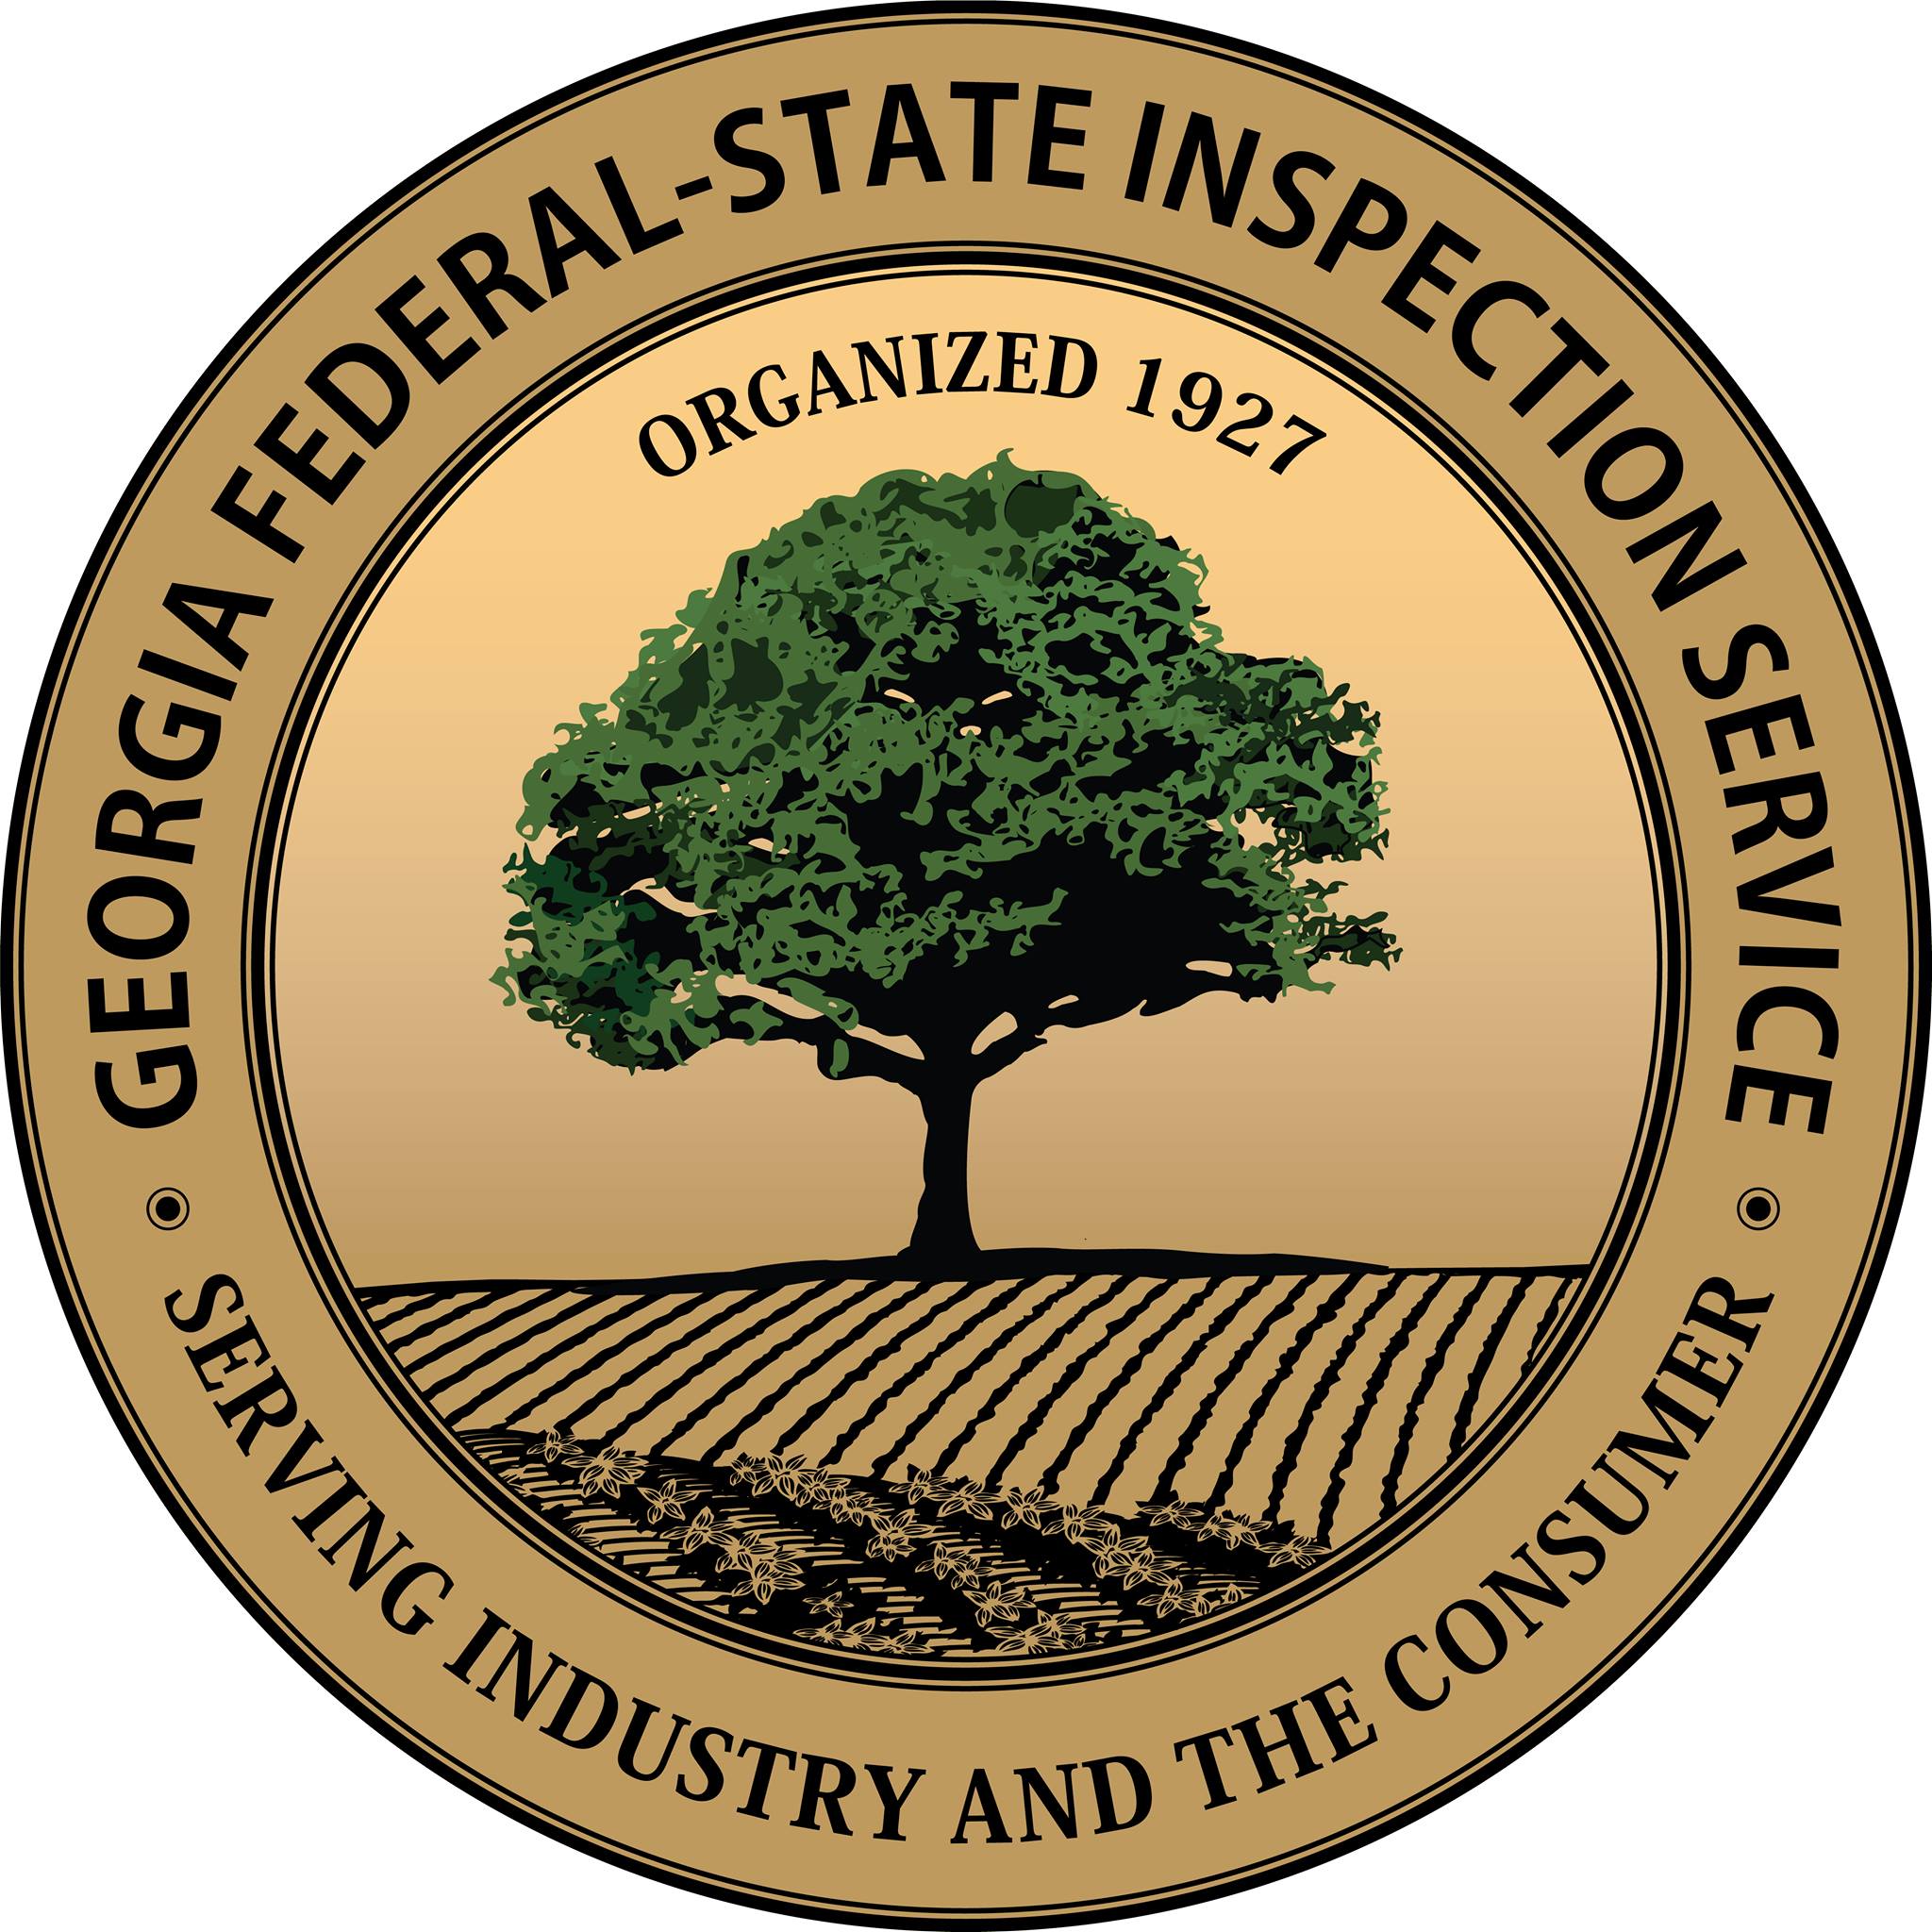 Georgia Federal-State Inspection Service, Inc.